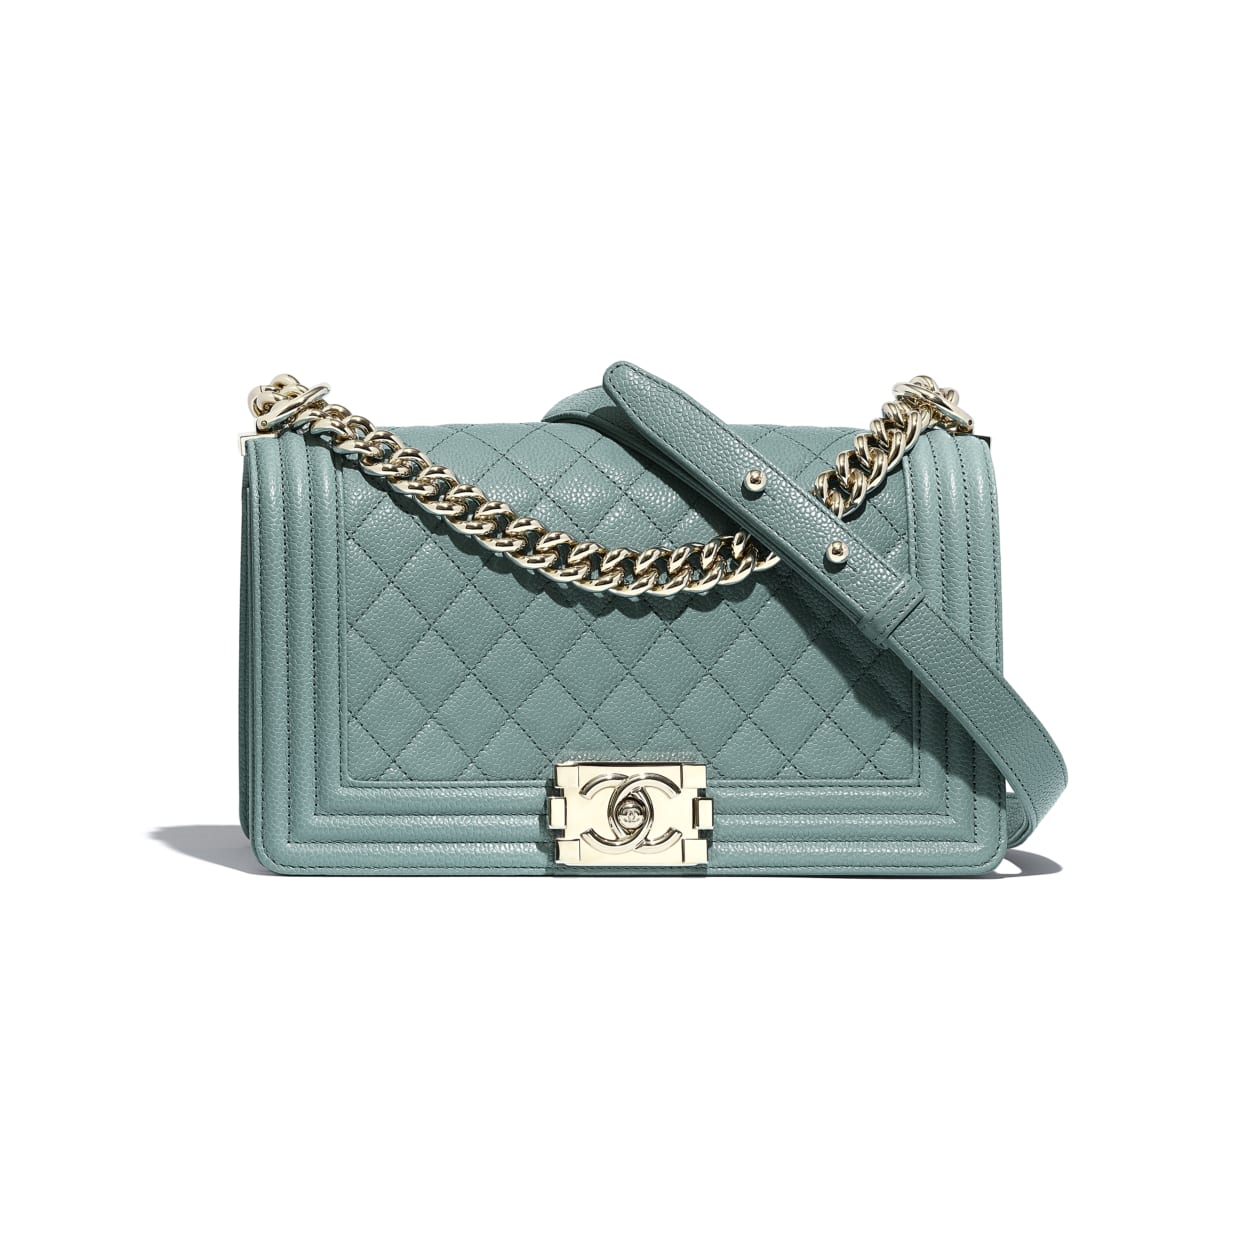 Australia Chanel Bag Price List Reference Guide - Spotted Fashion